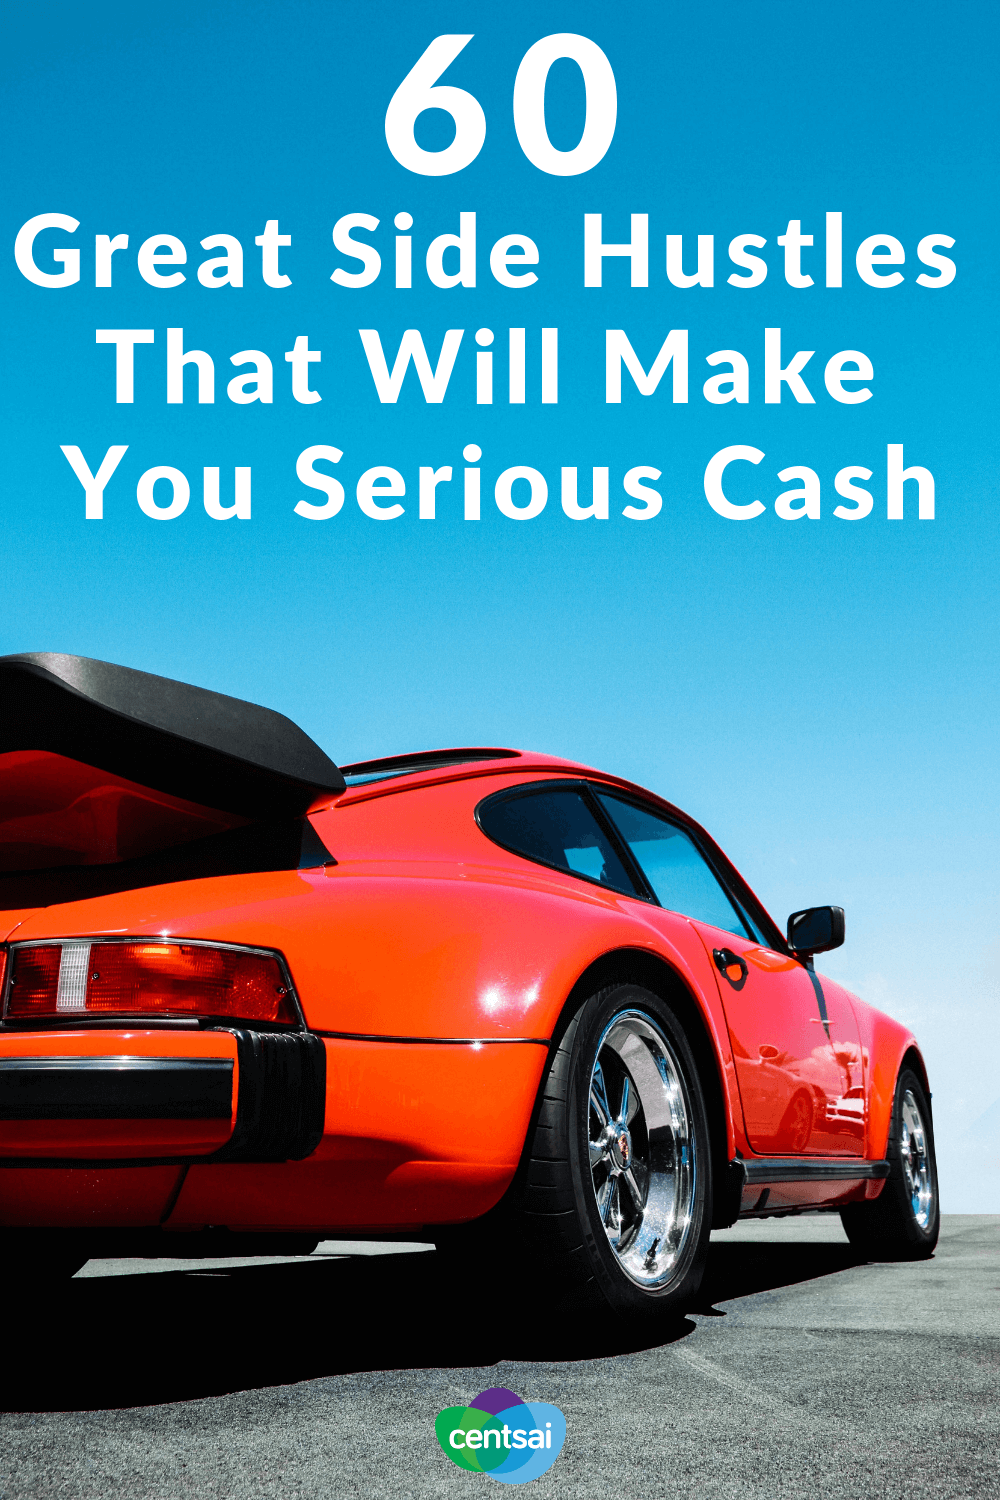 60 Great Side Hustles That Will Make You Serious Cash. Ever wish you had a little extra money? You don't have to sell your dog to get it. Check out these great side hustle ideas and get your moneymaking mojo on. #sidehustle #makemoney #extramoney